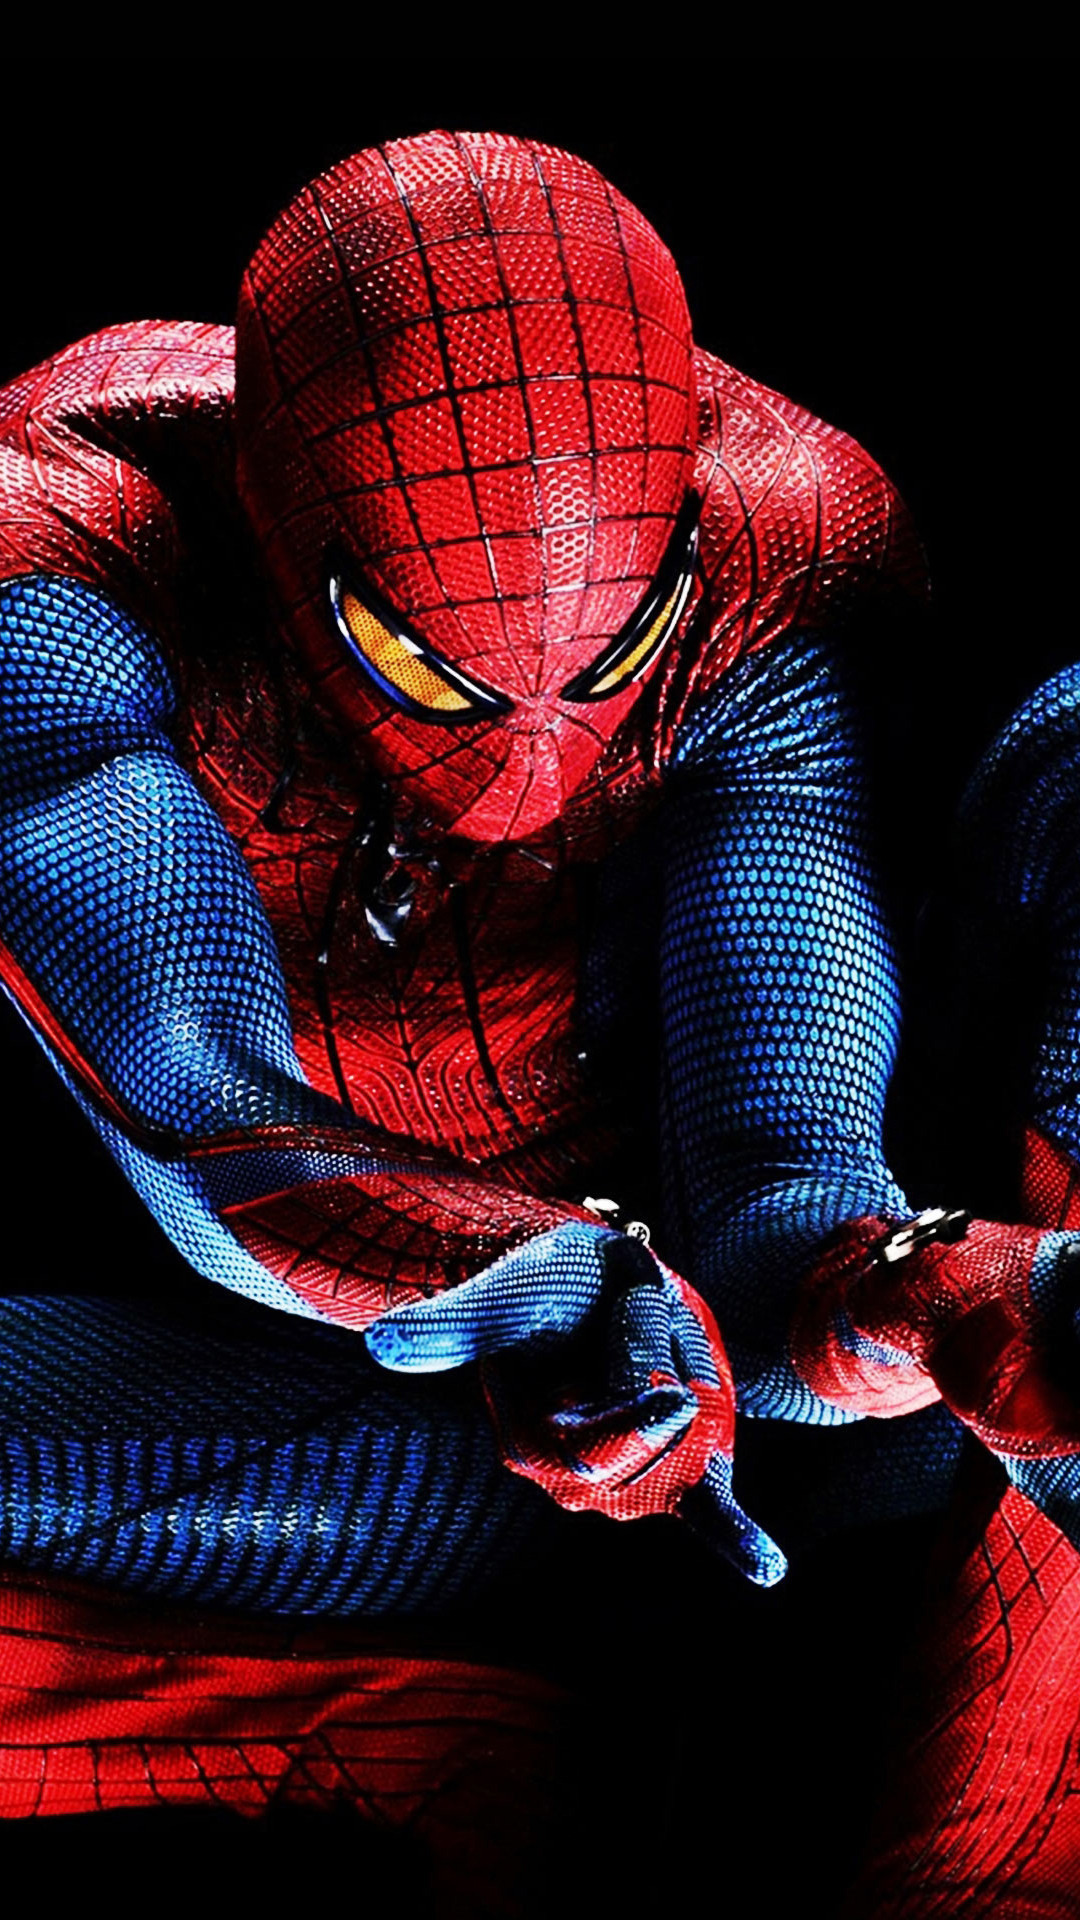 Free Download Spiderman Image for Iphone.